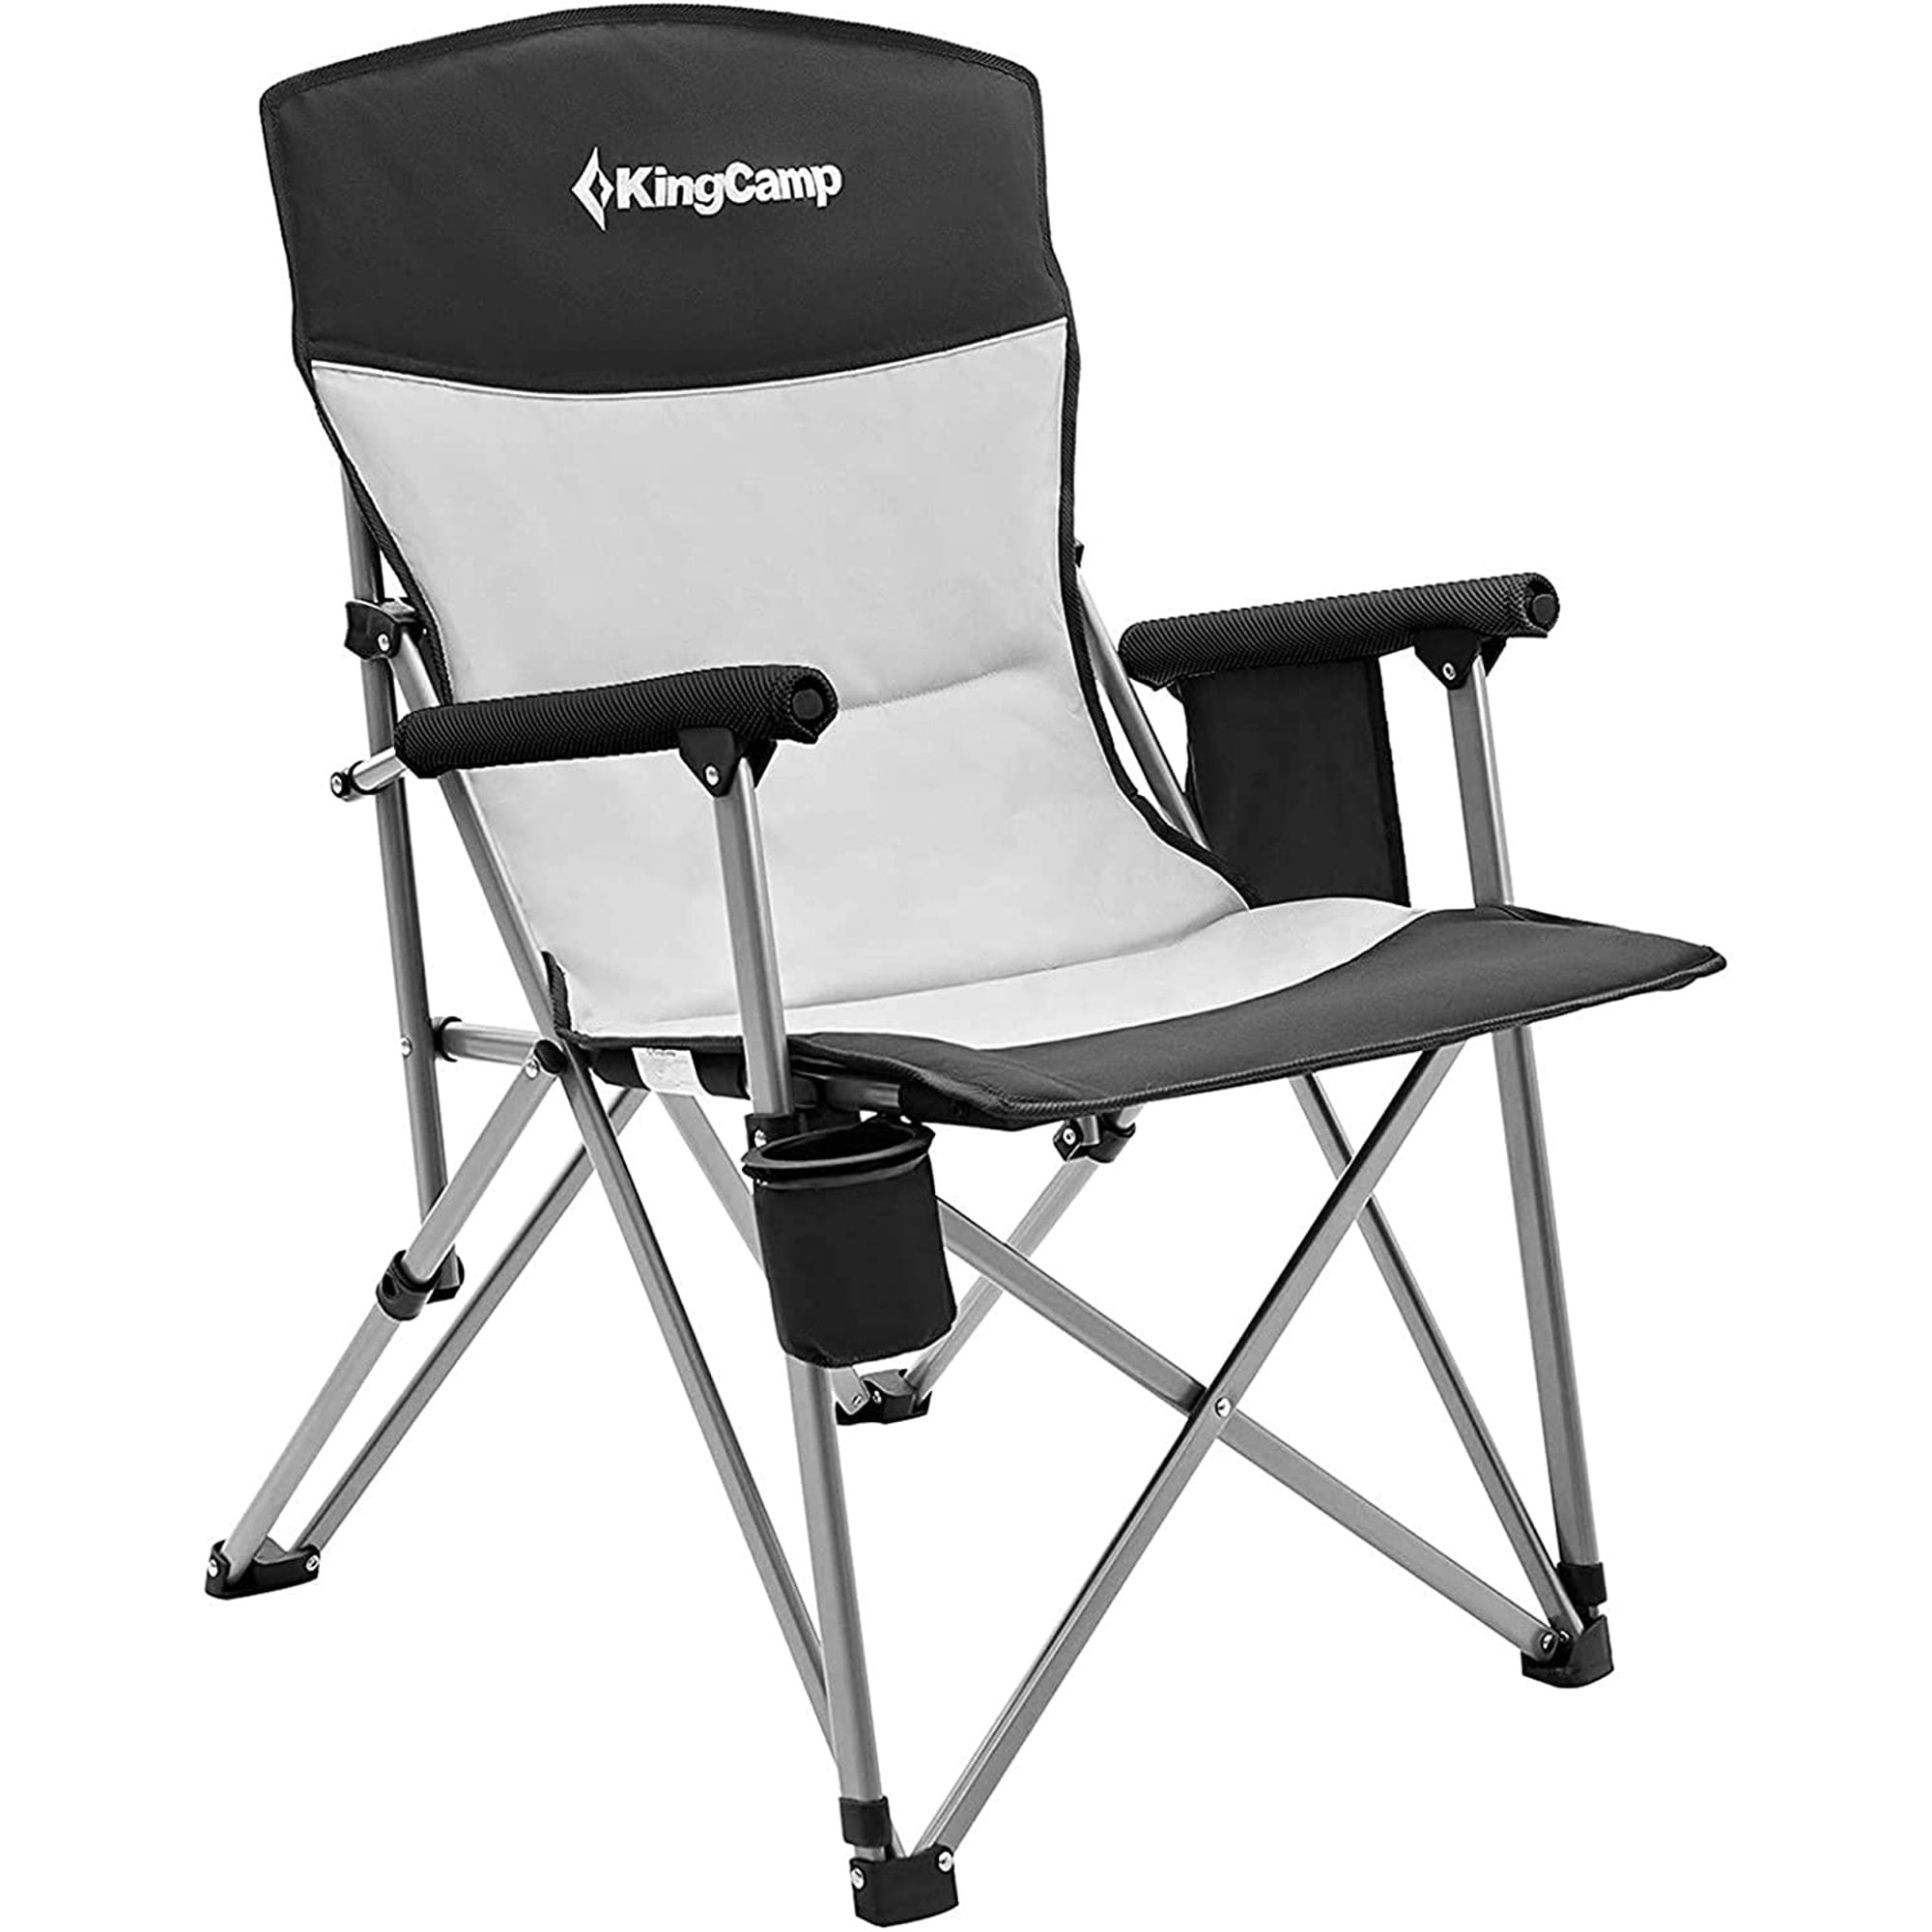 KingCamp Camping Folding Chair Lawn Chair Support up to 300lbs for Adult,  Black